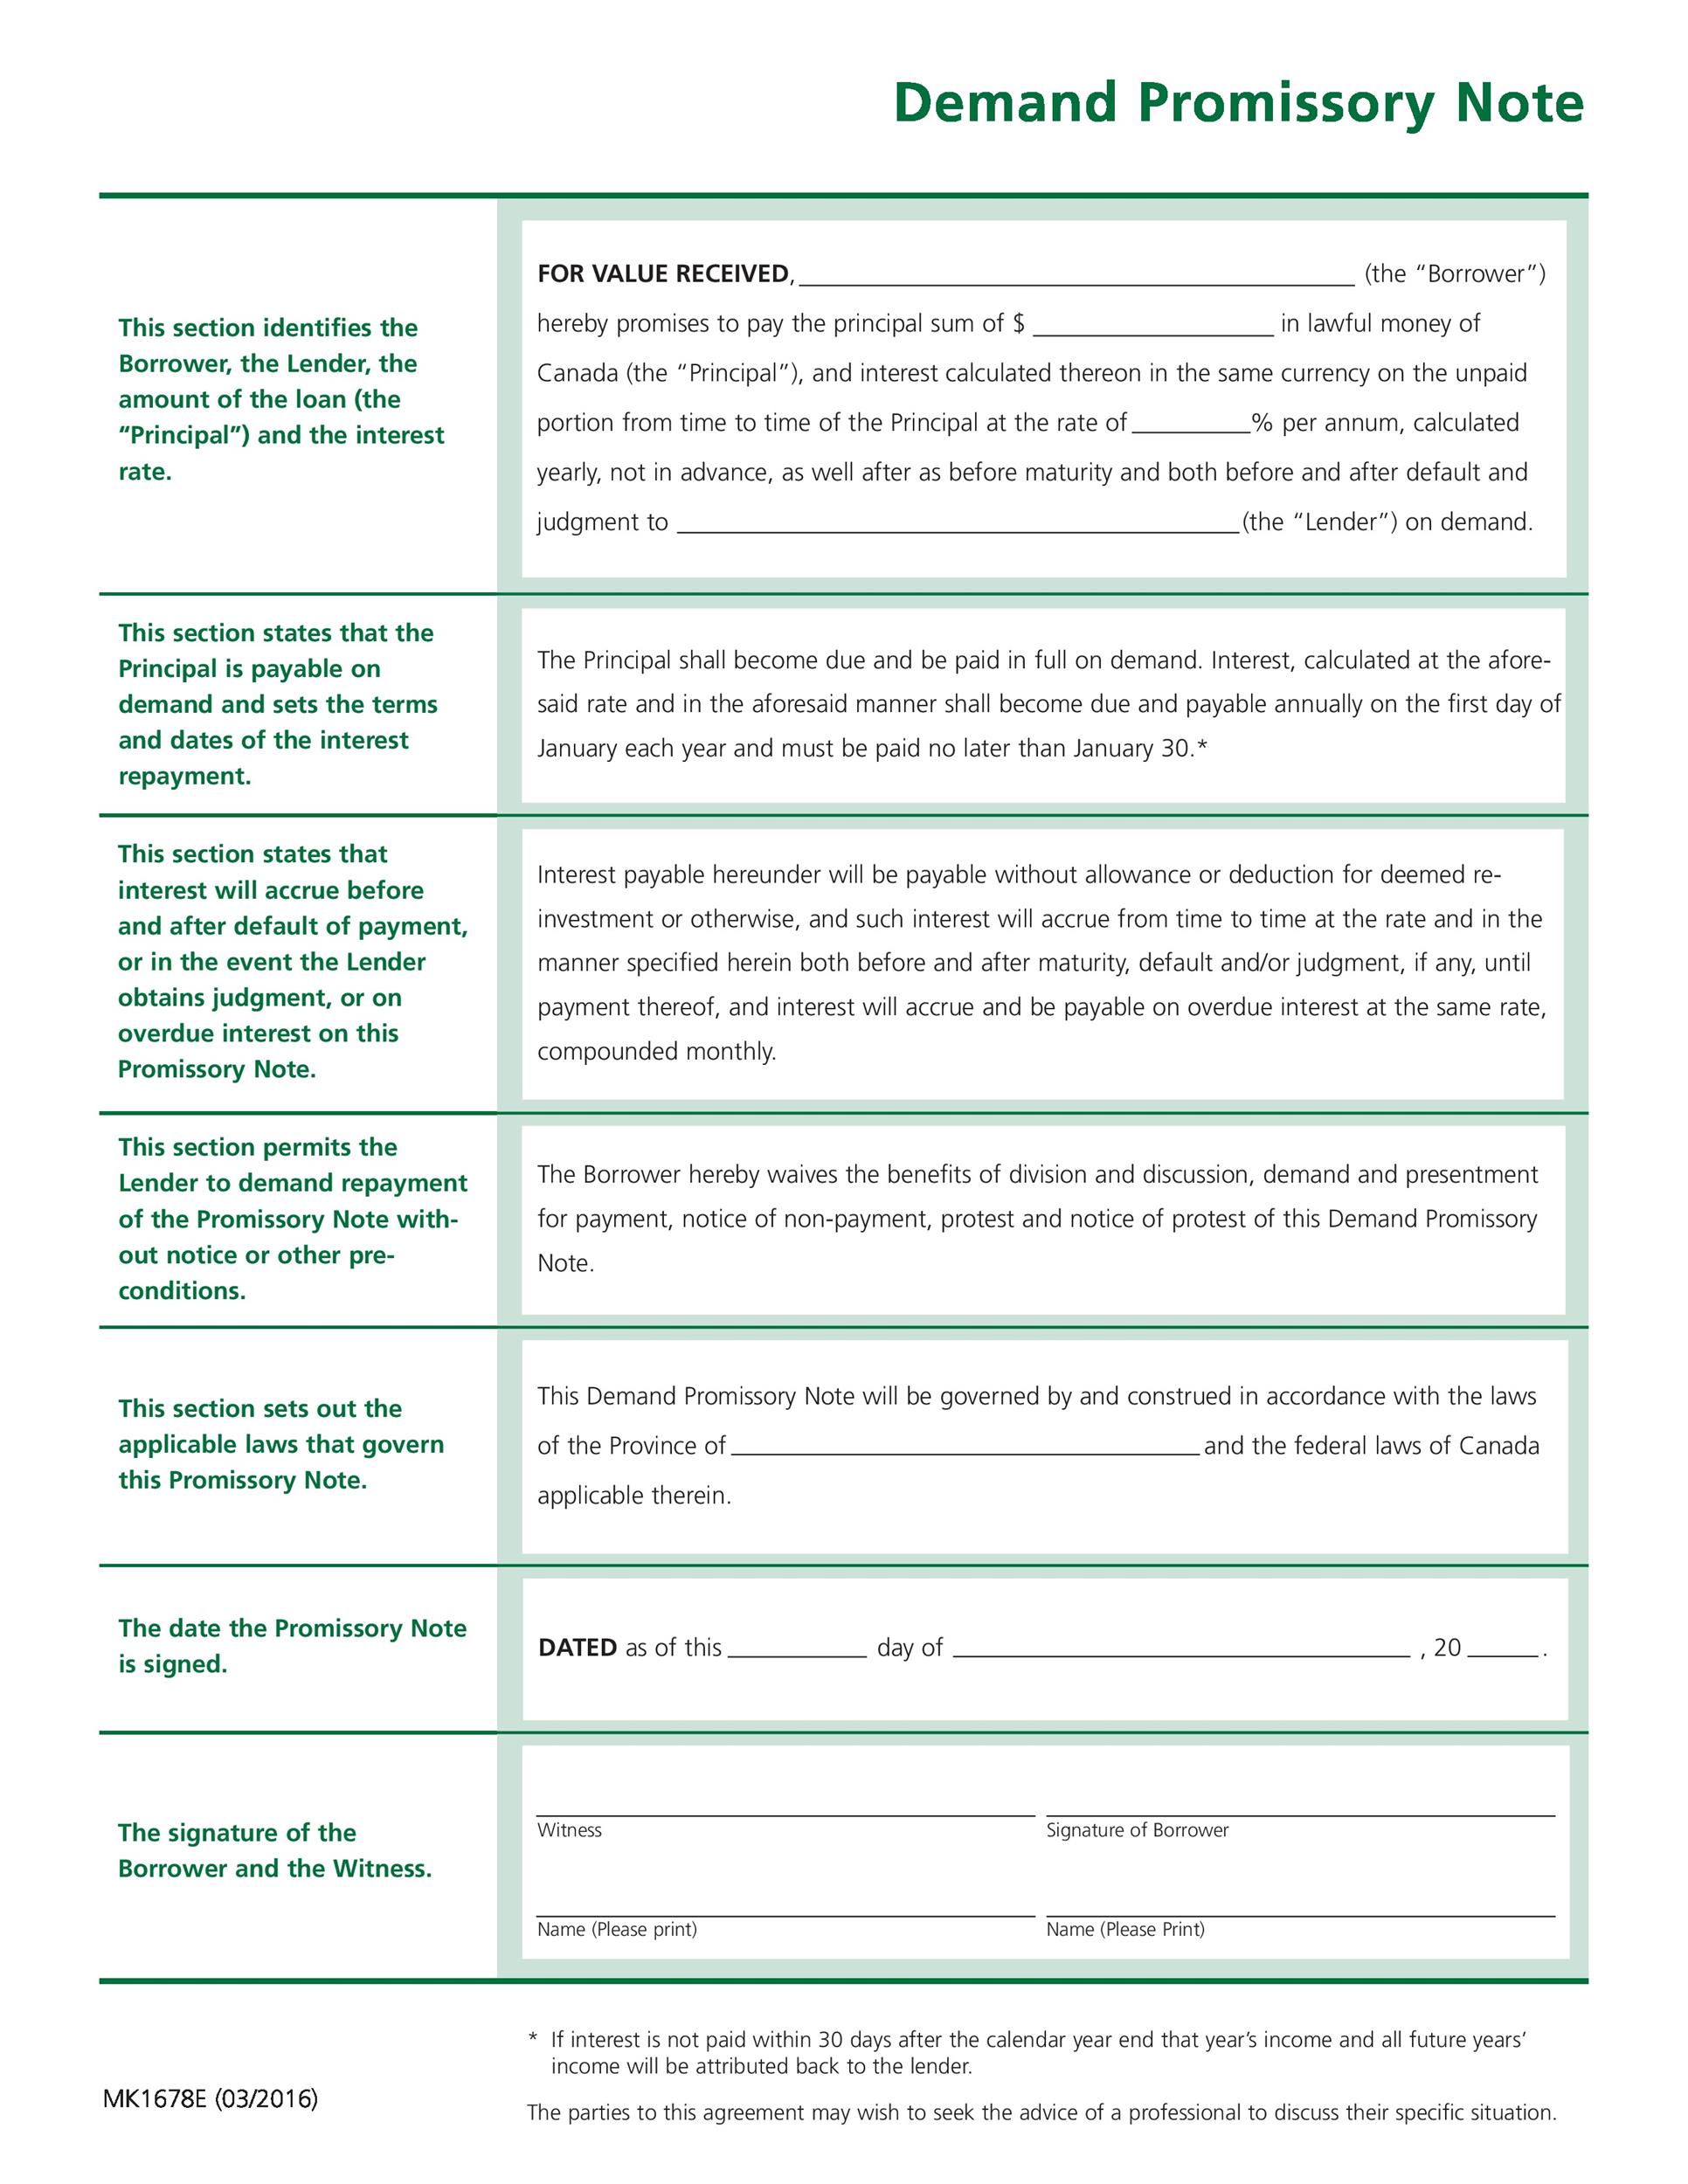 45 FREE Promissory Note Templates & Forms [Word & PDF] ᐅ ...